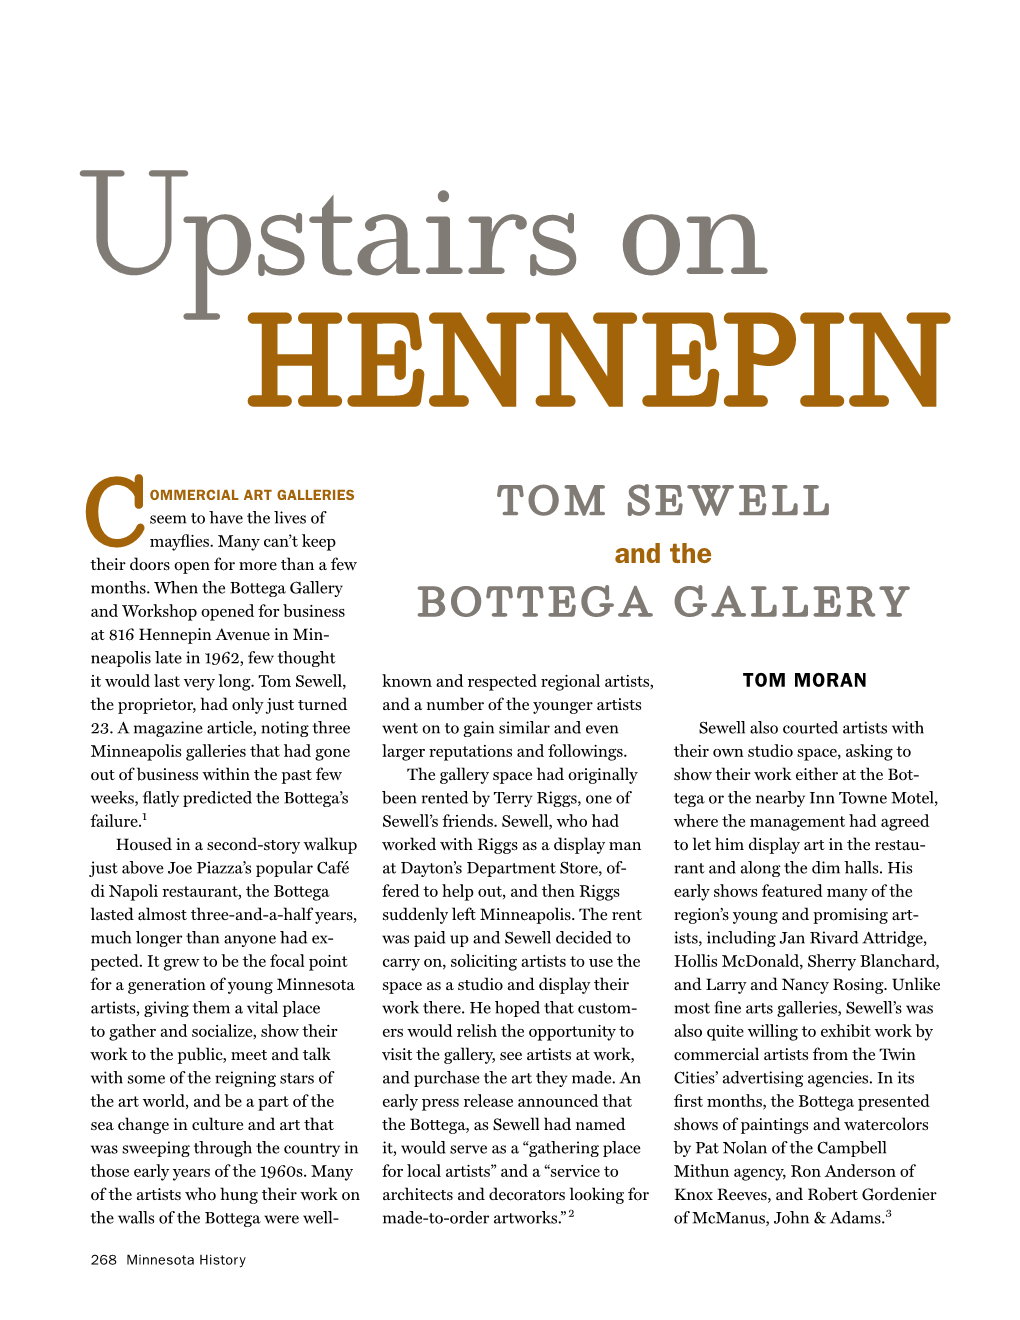 Upstairs on Hennepin: Tom Sewell and the Bottega Gallery